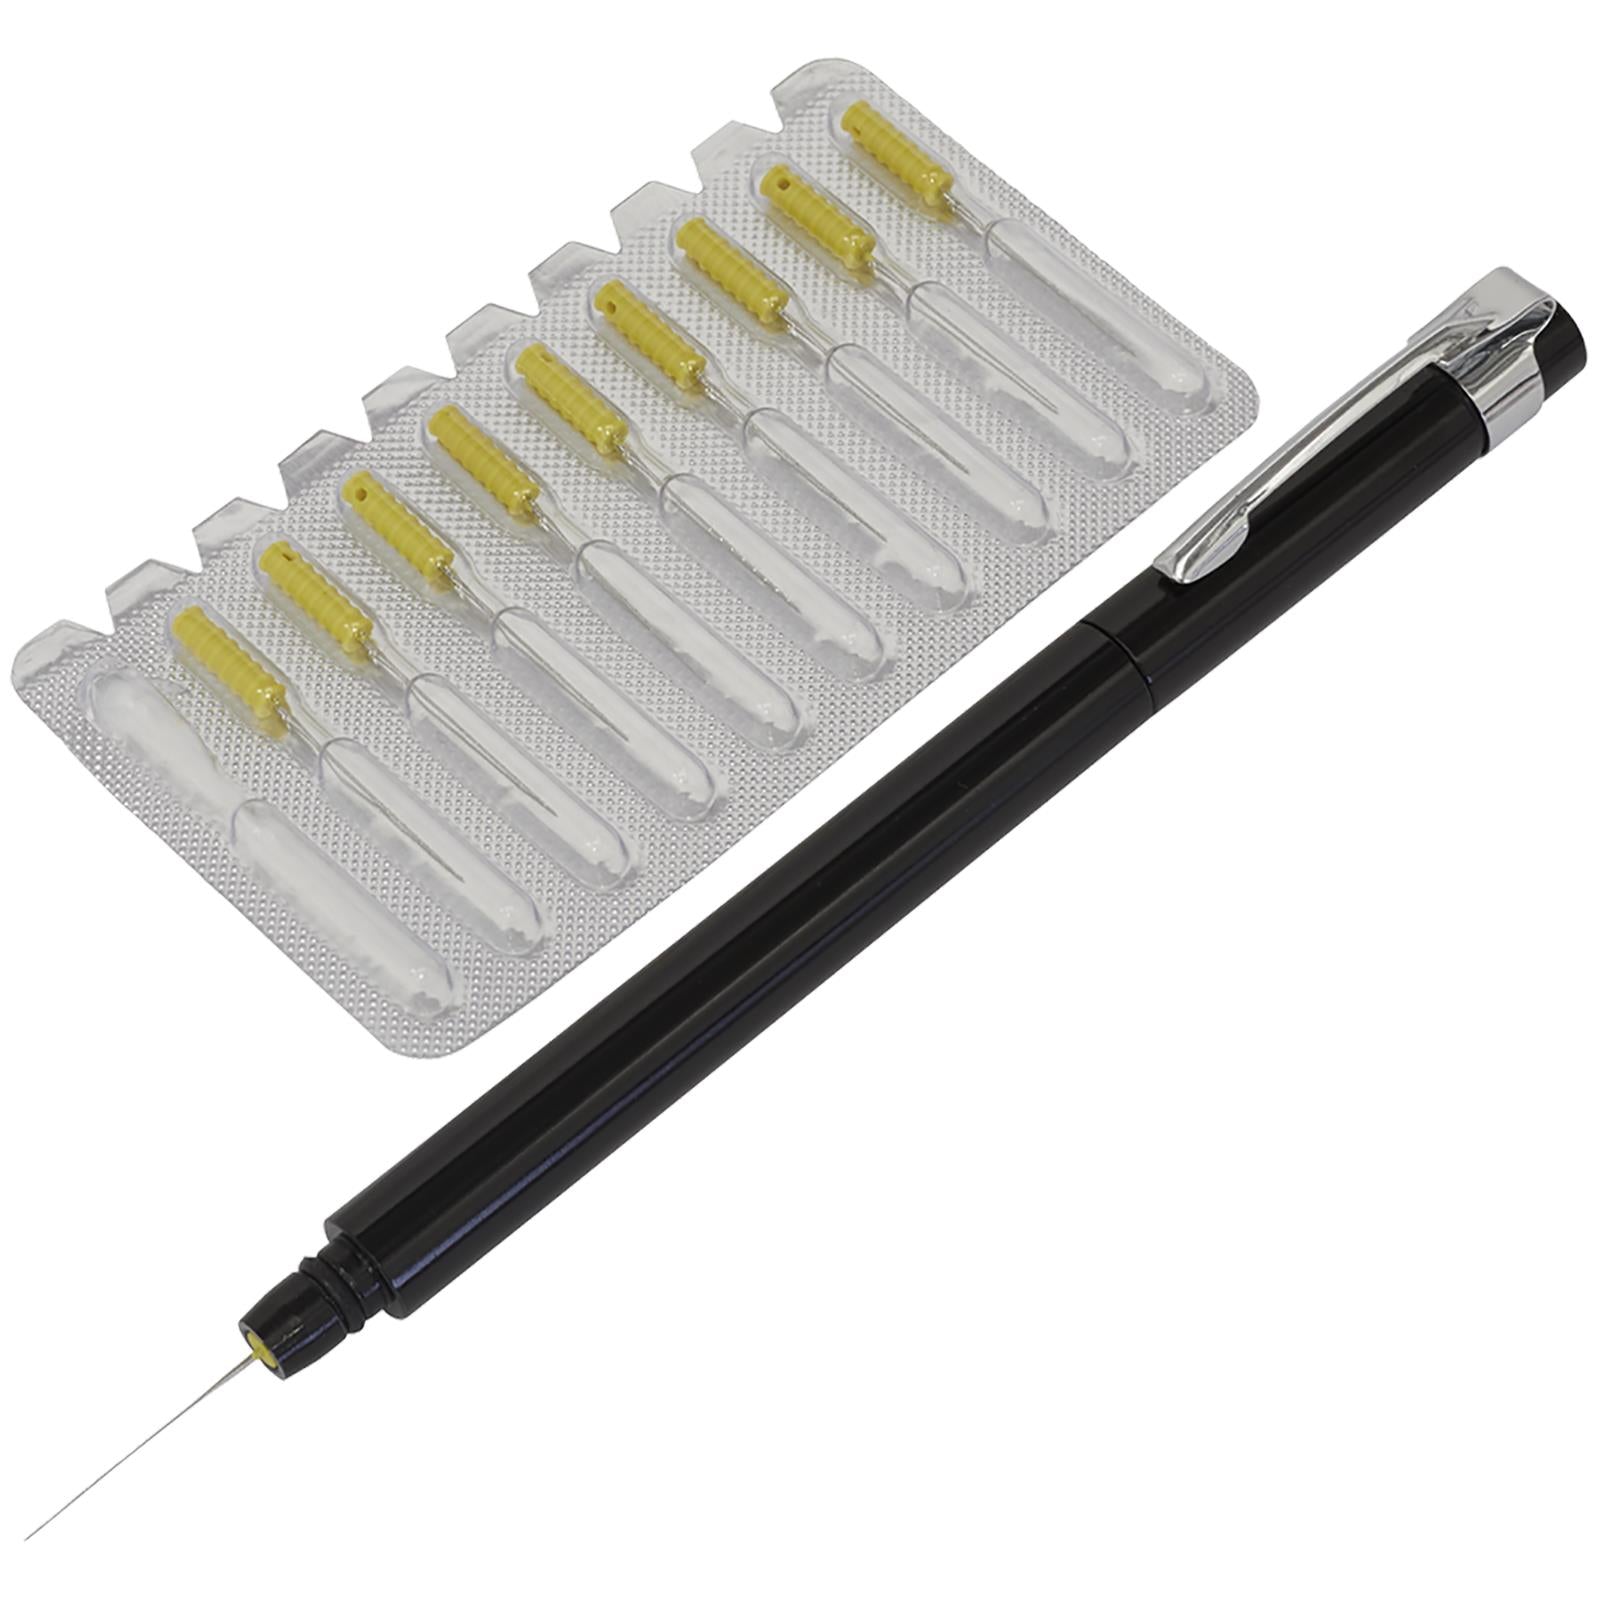 Sealey Paint Dirt Removal Pen with Needle Set